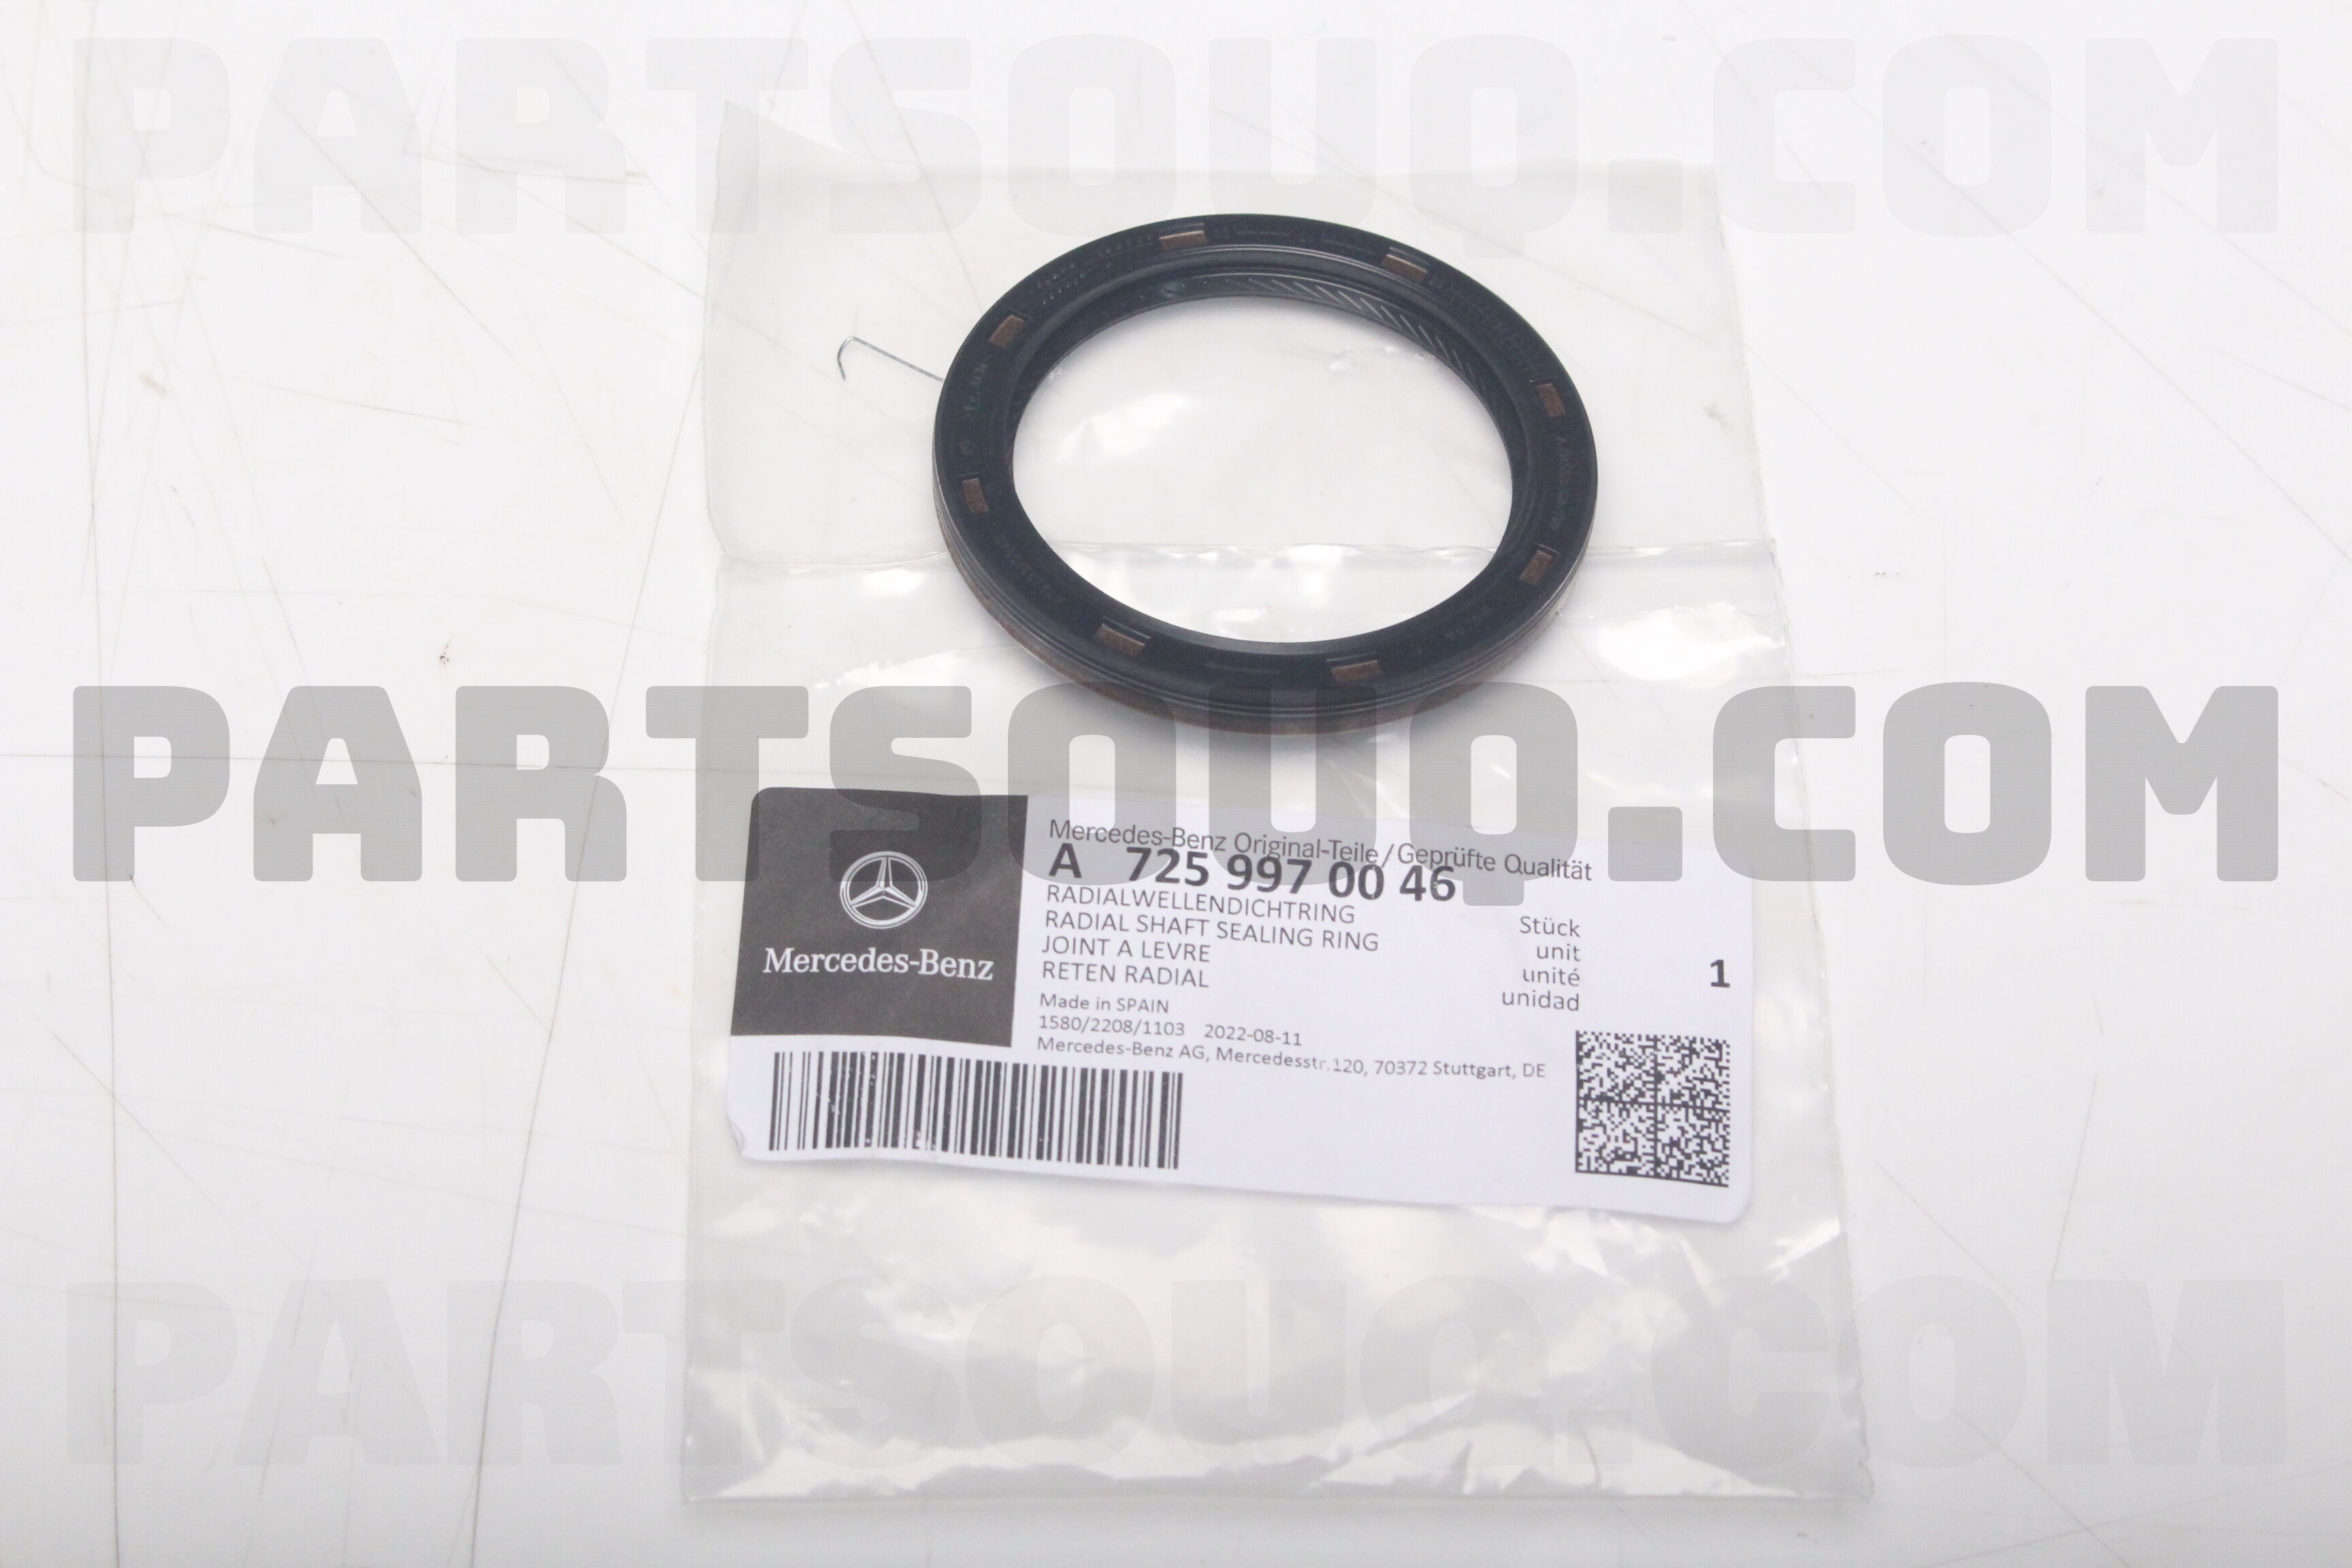 New Mercedes Benz Actros Axor Lift Axle Radial Shaft Sealing Ring  A0219976947 | eBay